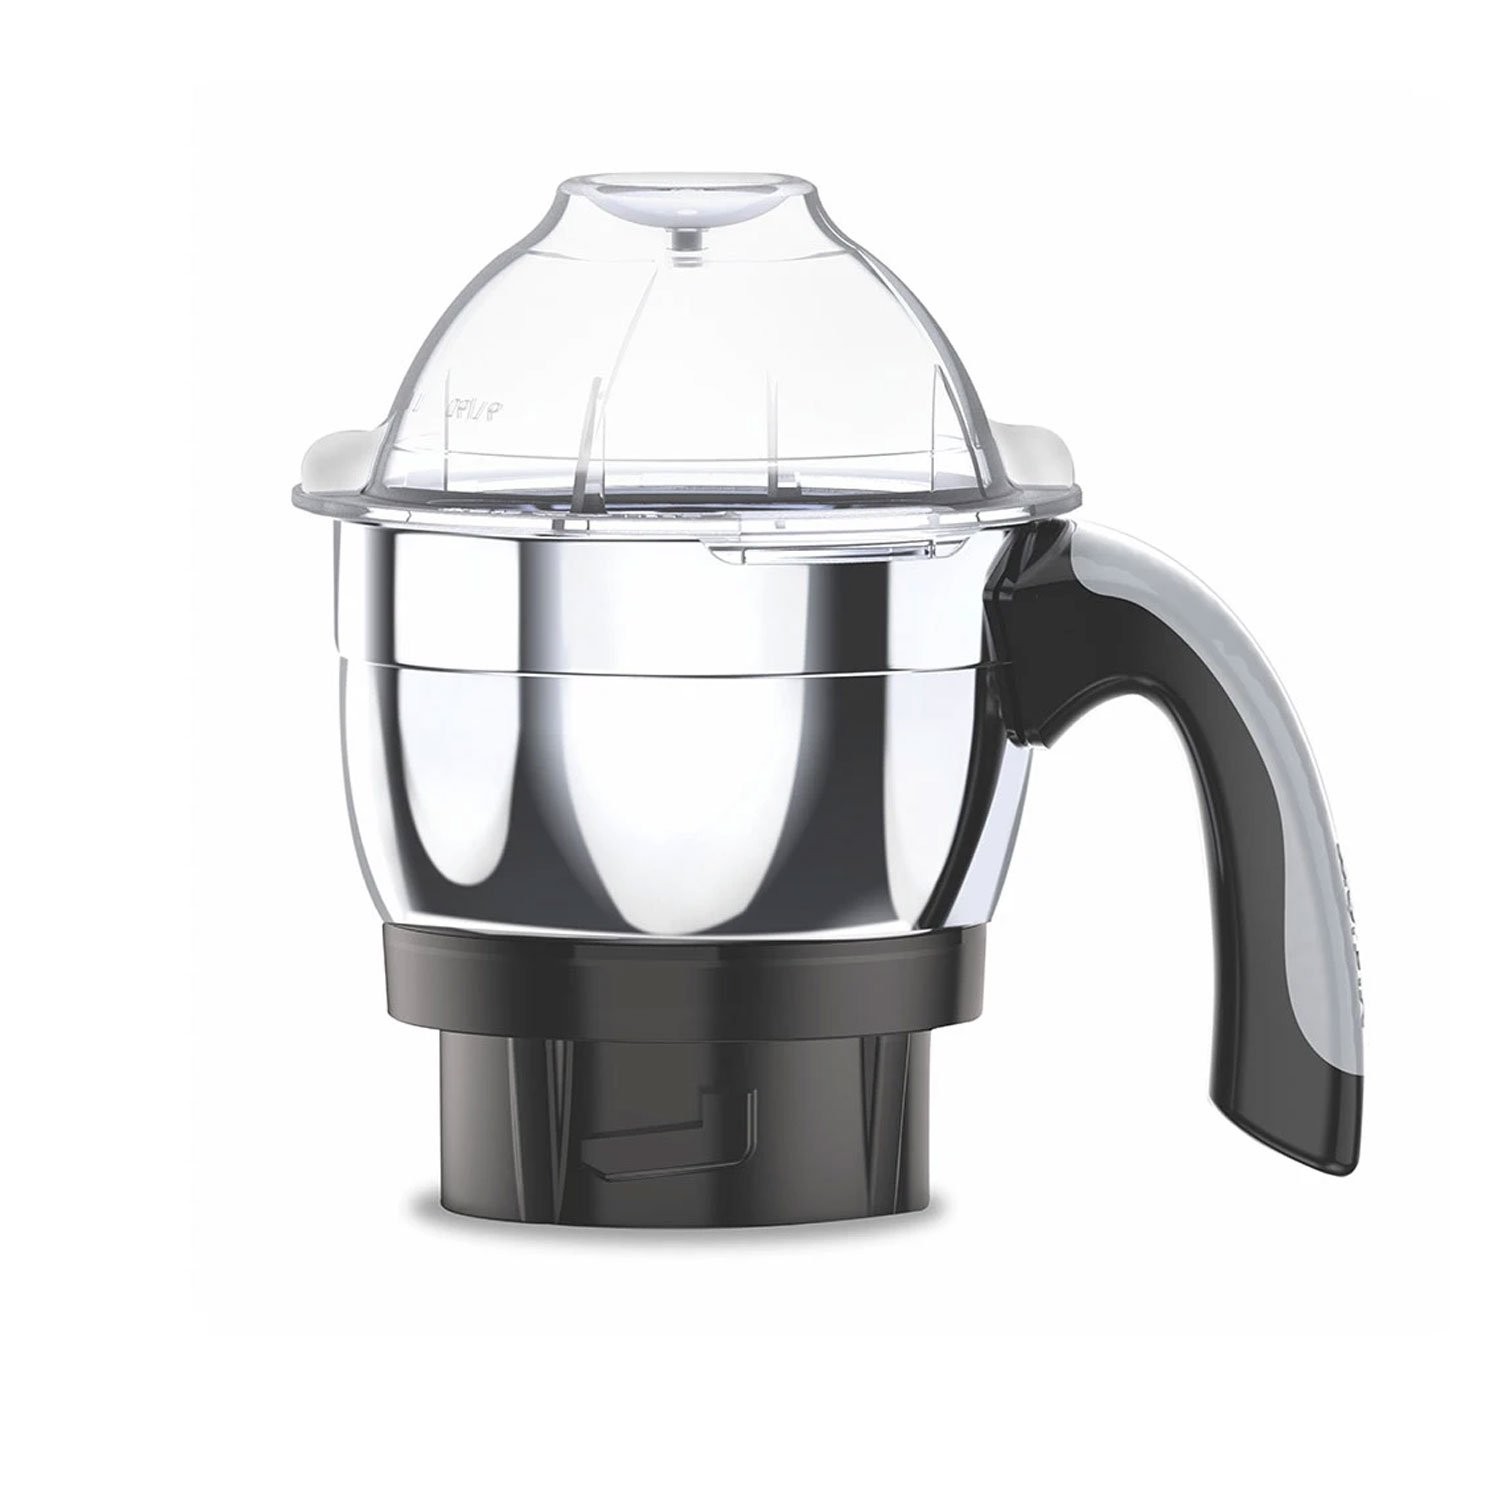 vidiem-eva-nero-650w-stainless-steel-jars-indian-mixer-grinder-spice-coffee-grinder-110v-for-use-in-canada-usa5